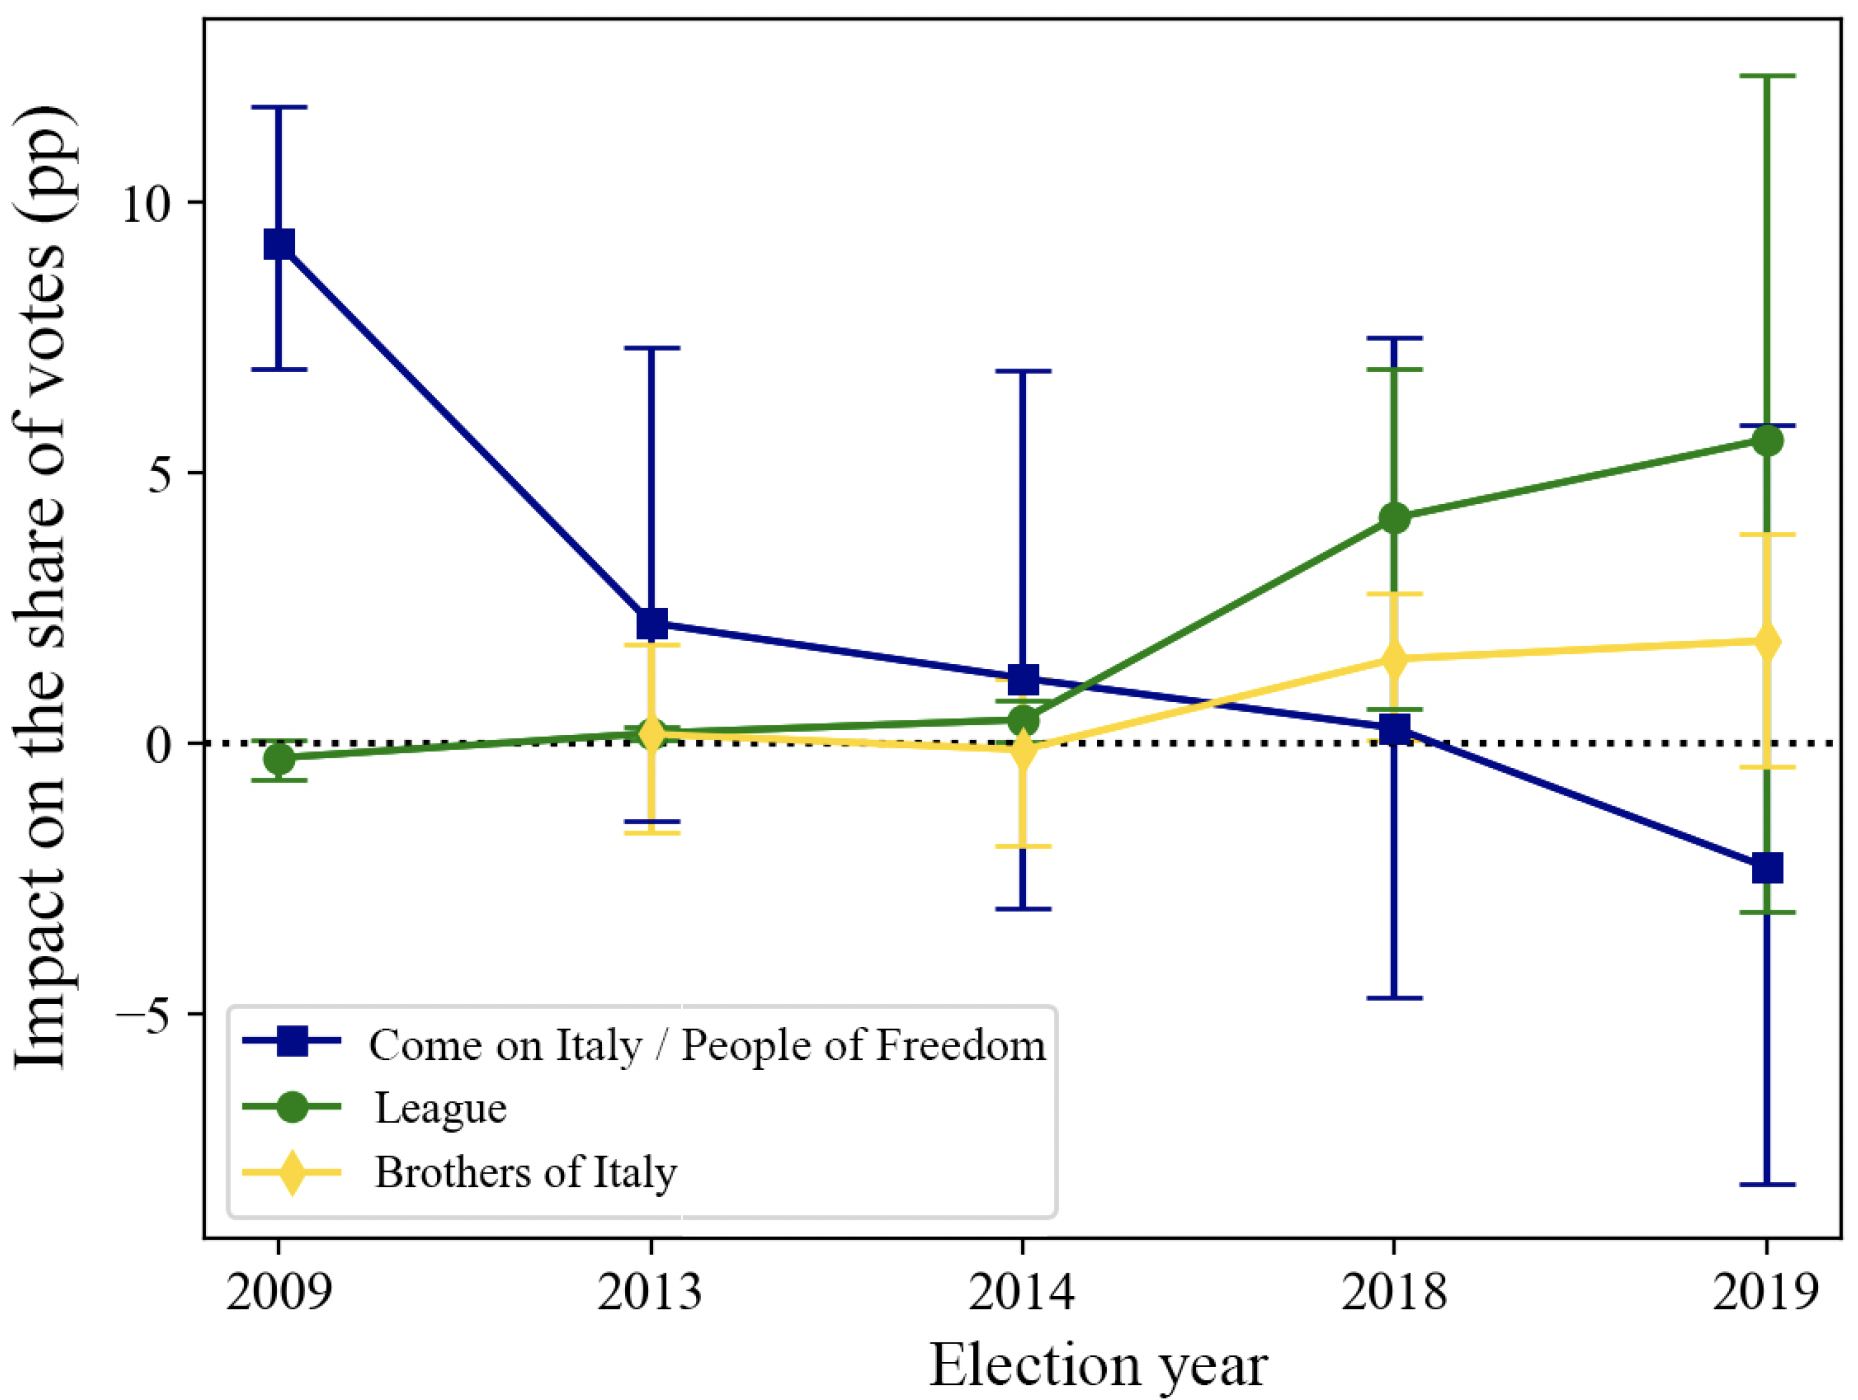 Figure 4 Impact of L’Aquila 2009 on the share of votes for Berlusconi’s party (Come on Italy/People of Freedom), League and Brothers of Italy